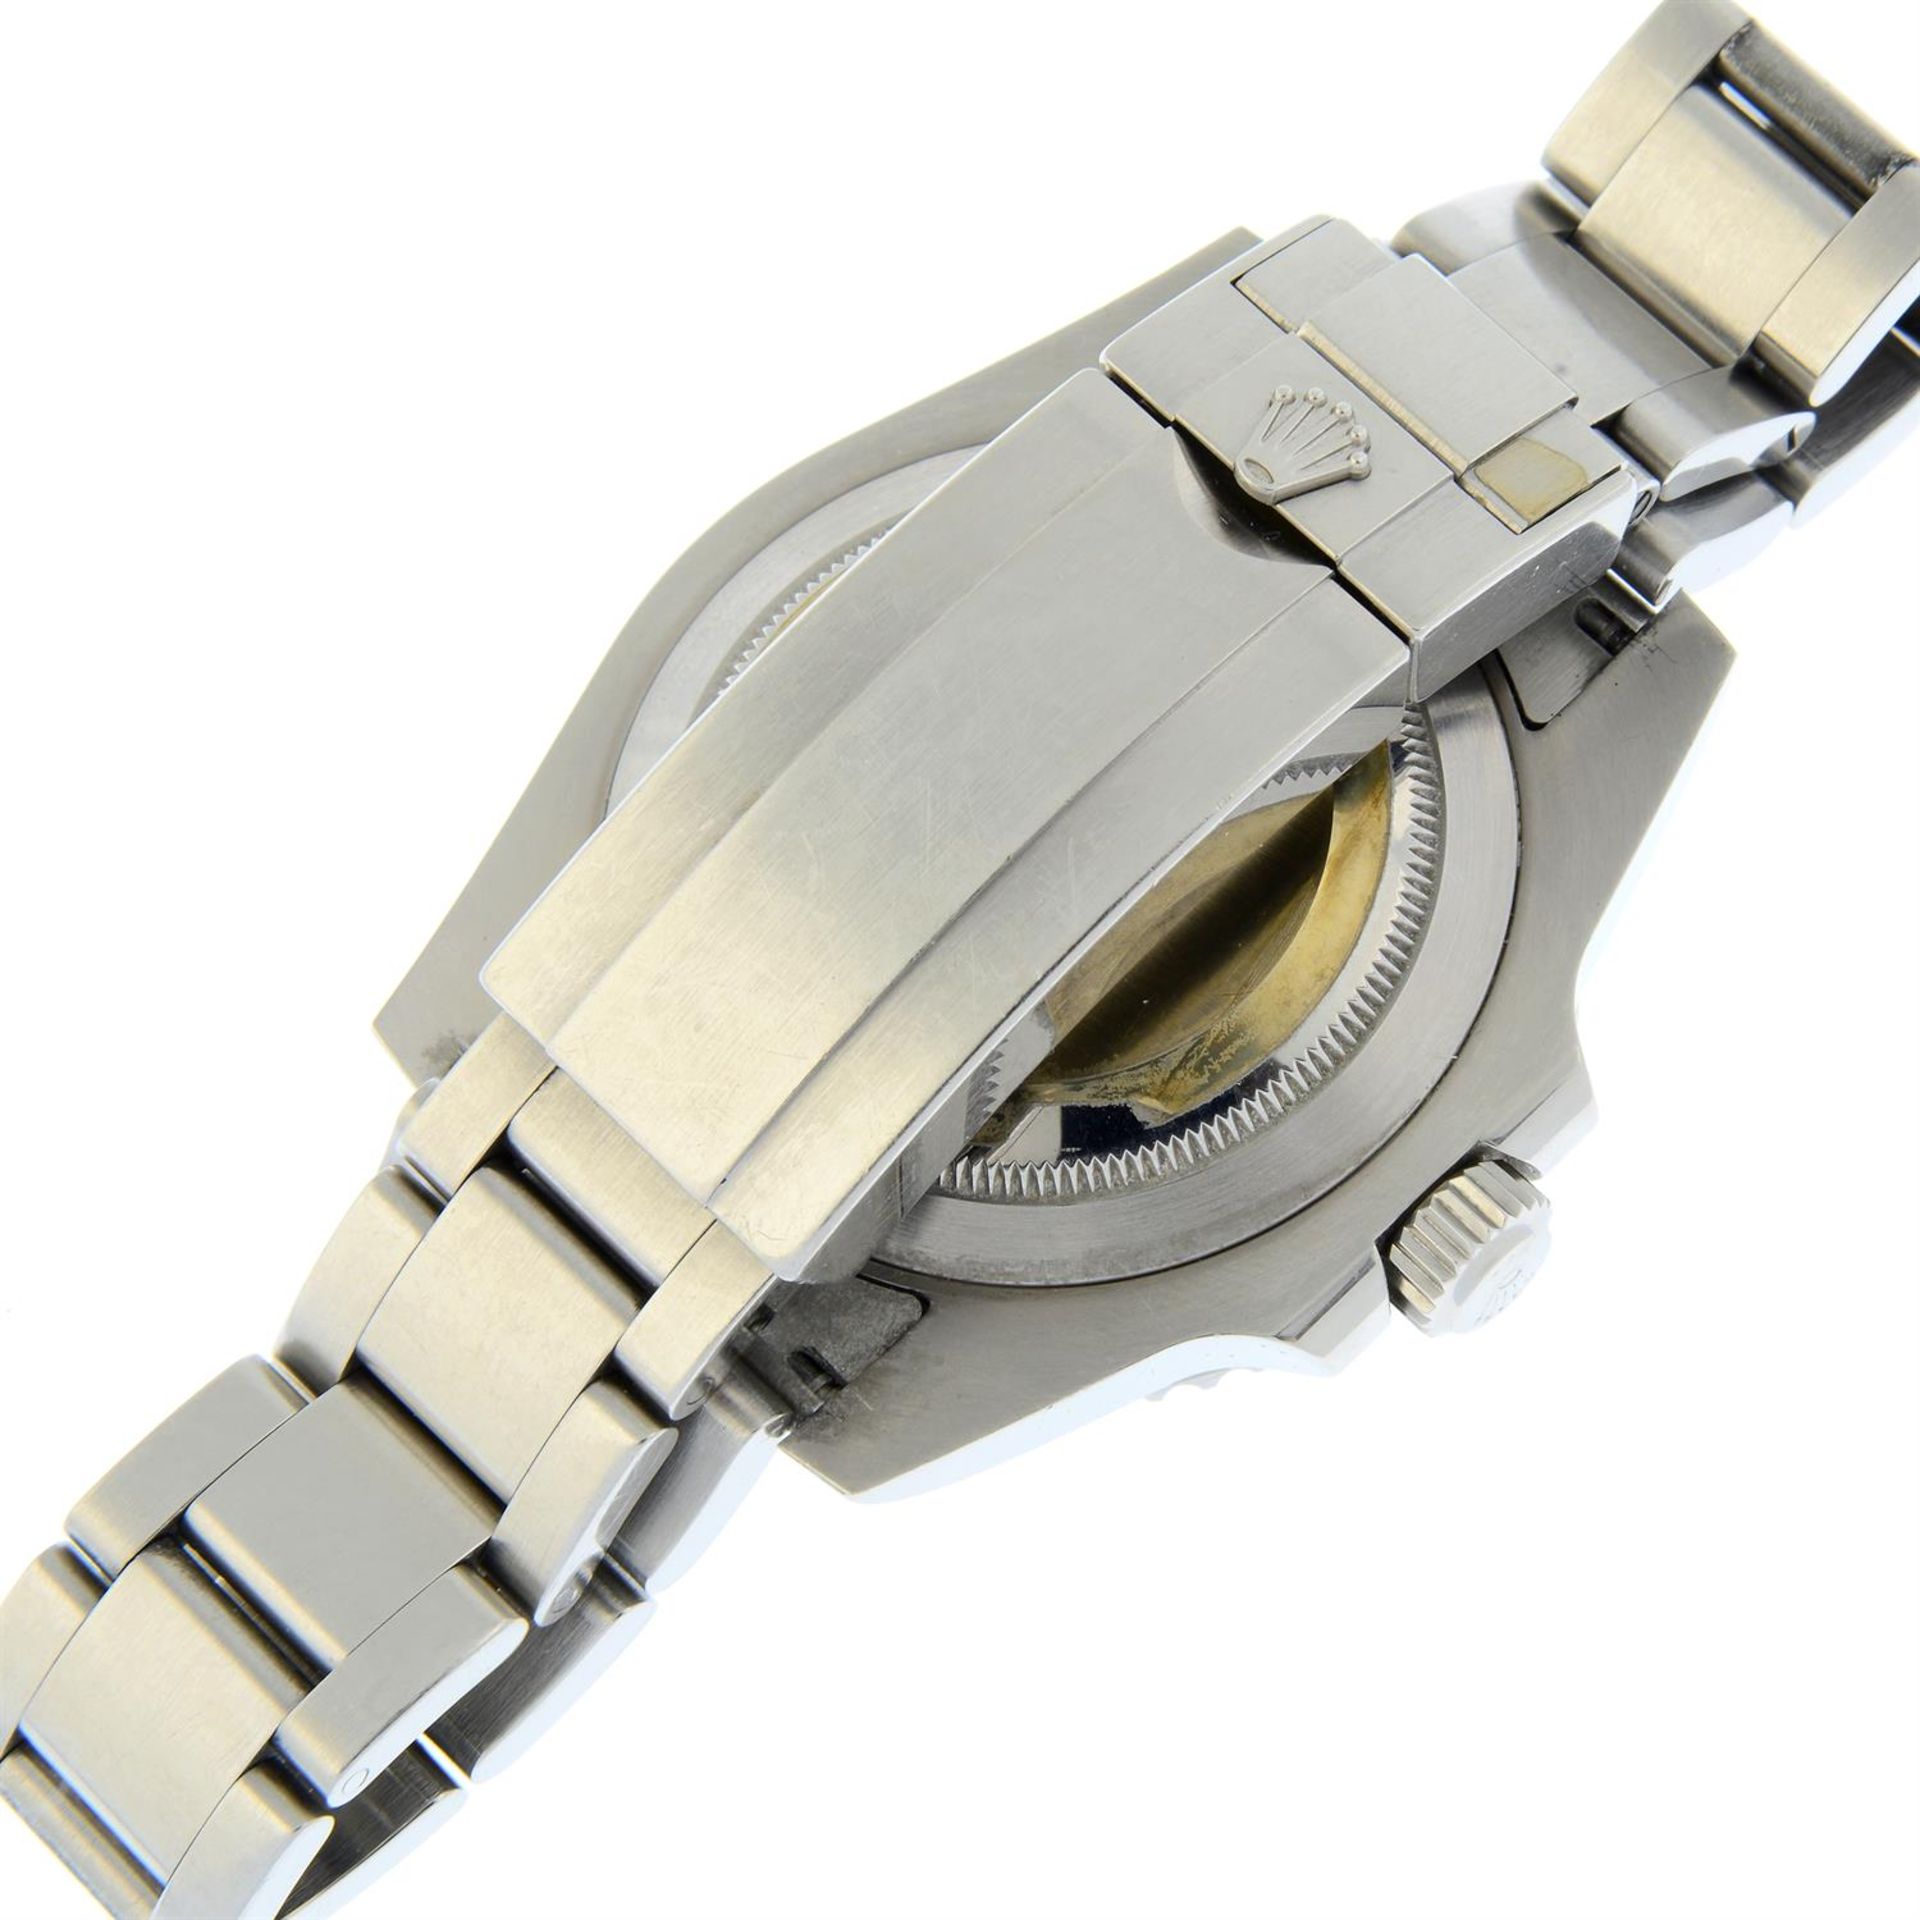 ROLEX - a stainless steel Oyster Perpetual Submariner "Hulk" bracelet watch, 41mm - Image 2 of 6